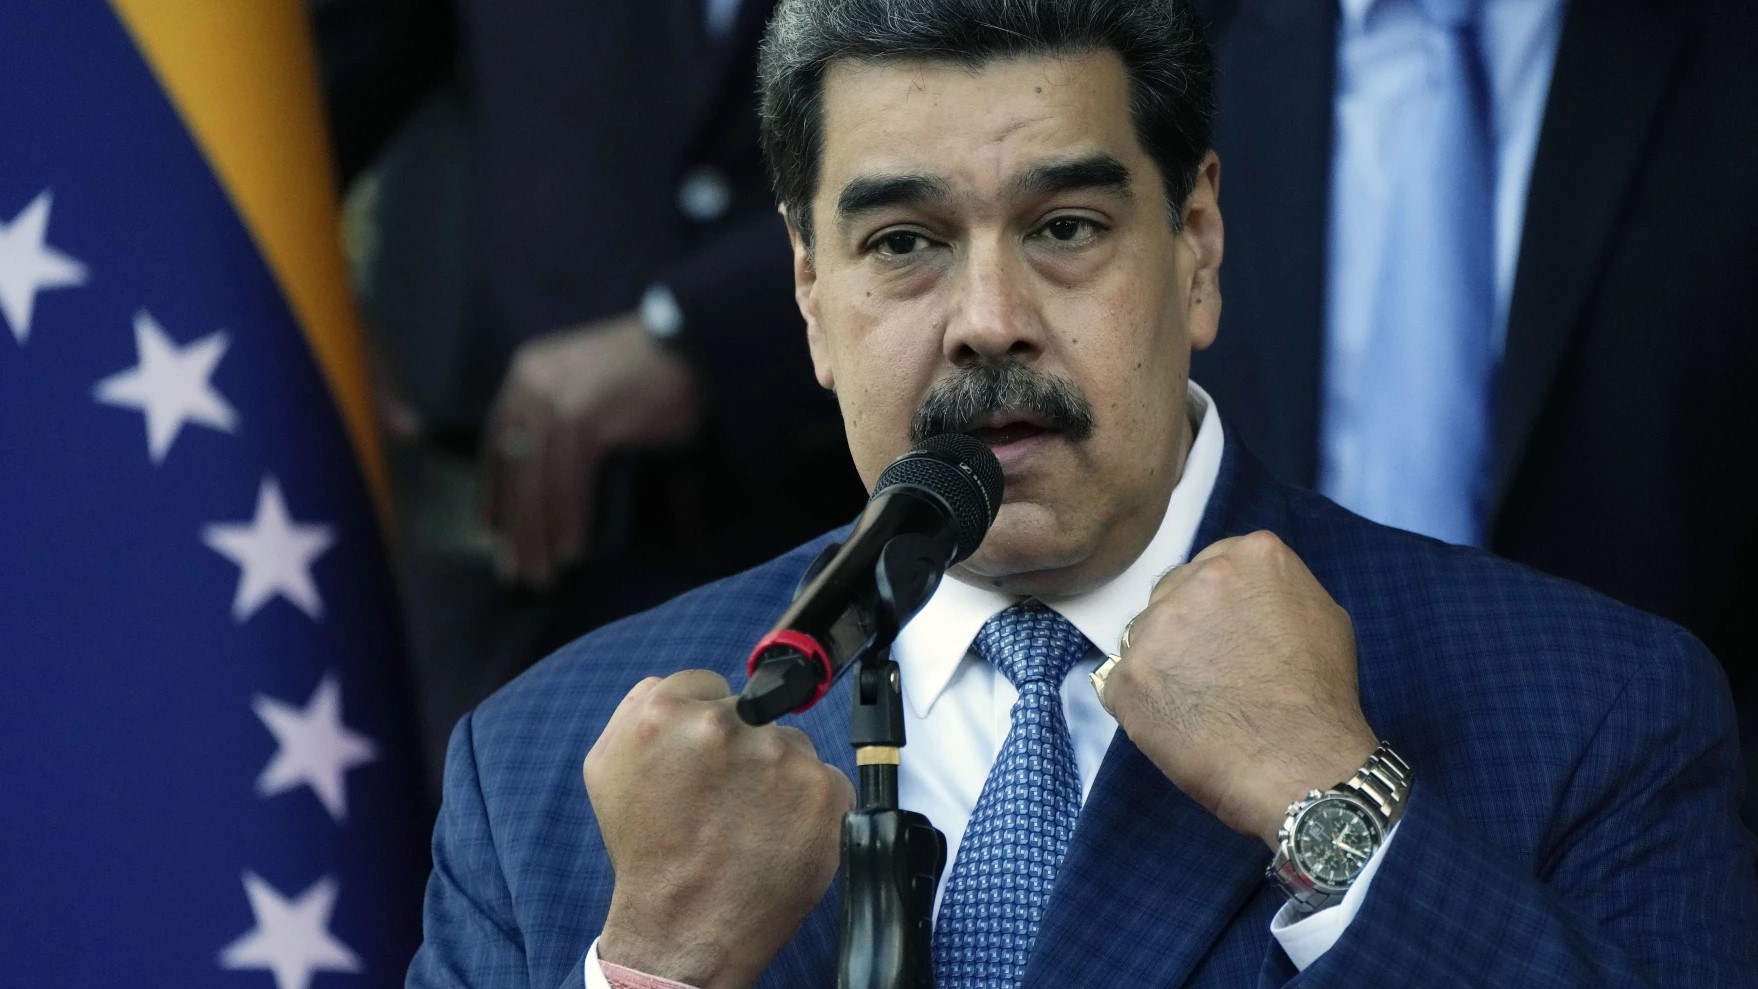 The U.S. predicted his downfall but Maduro strengthens his grip on power in Venezuela